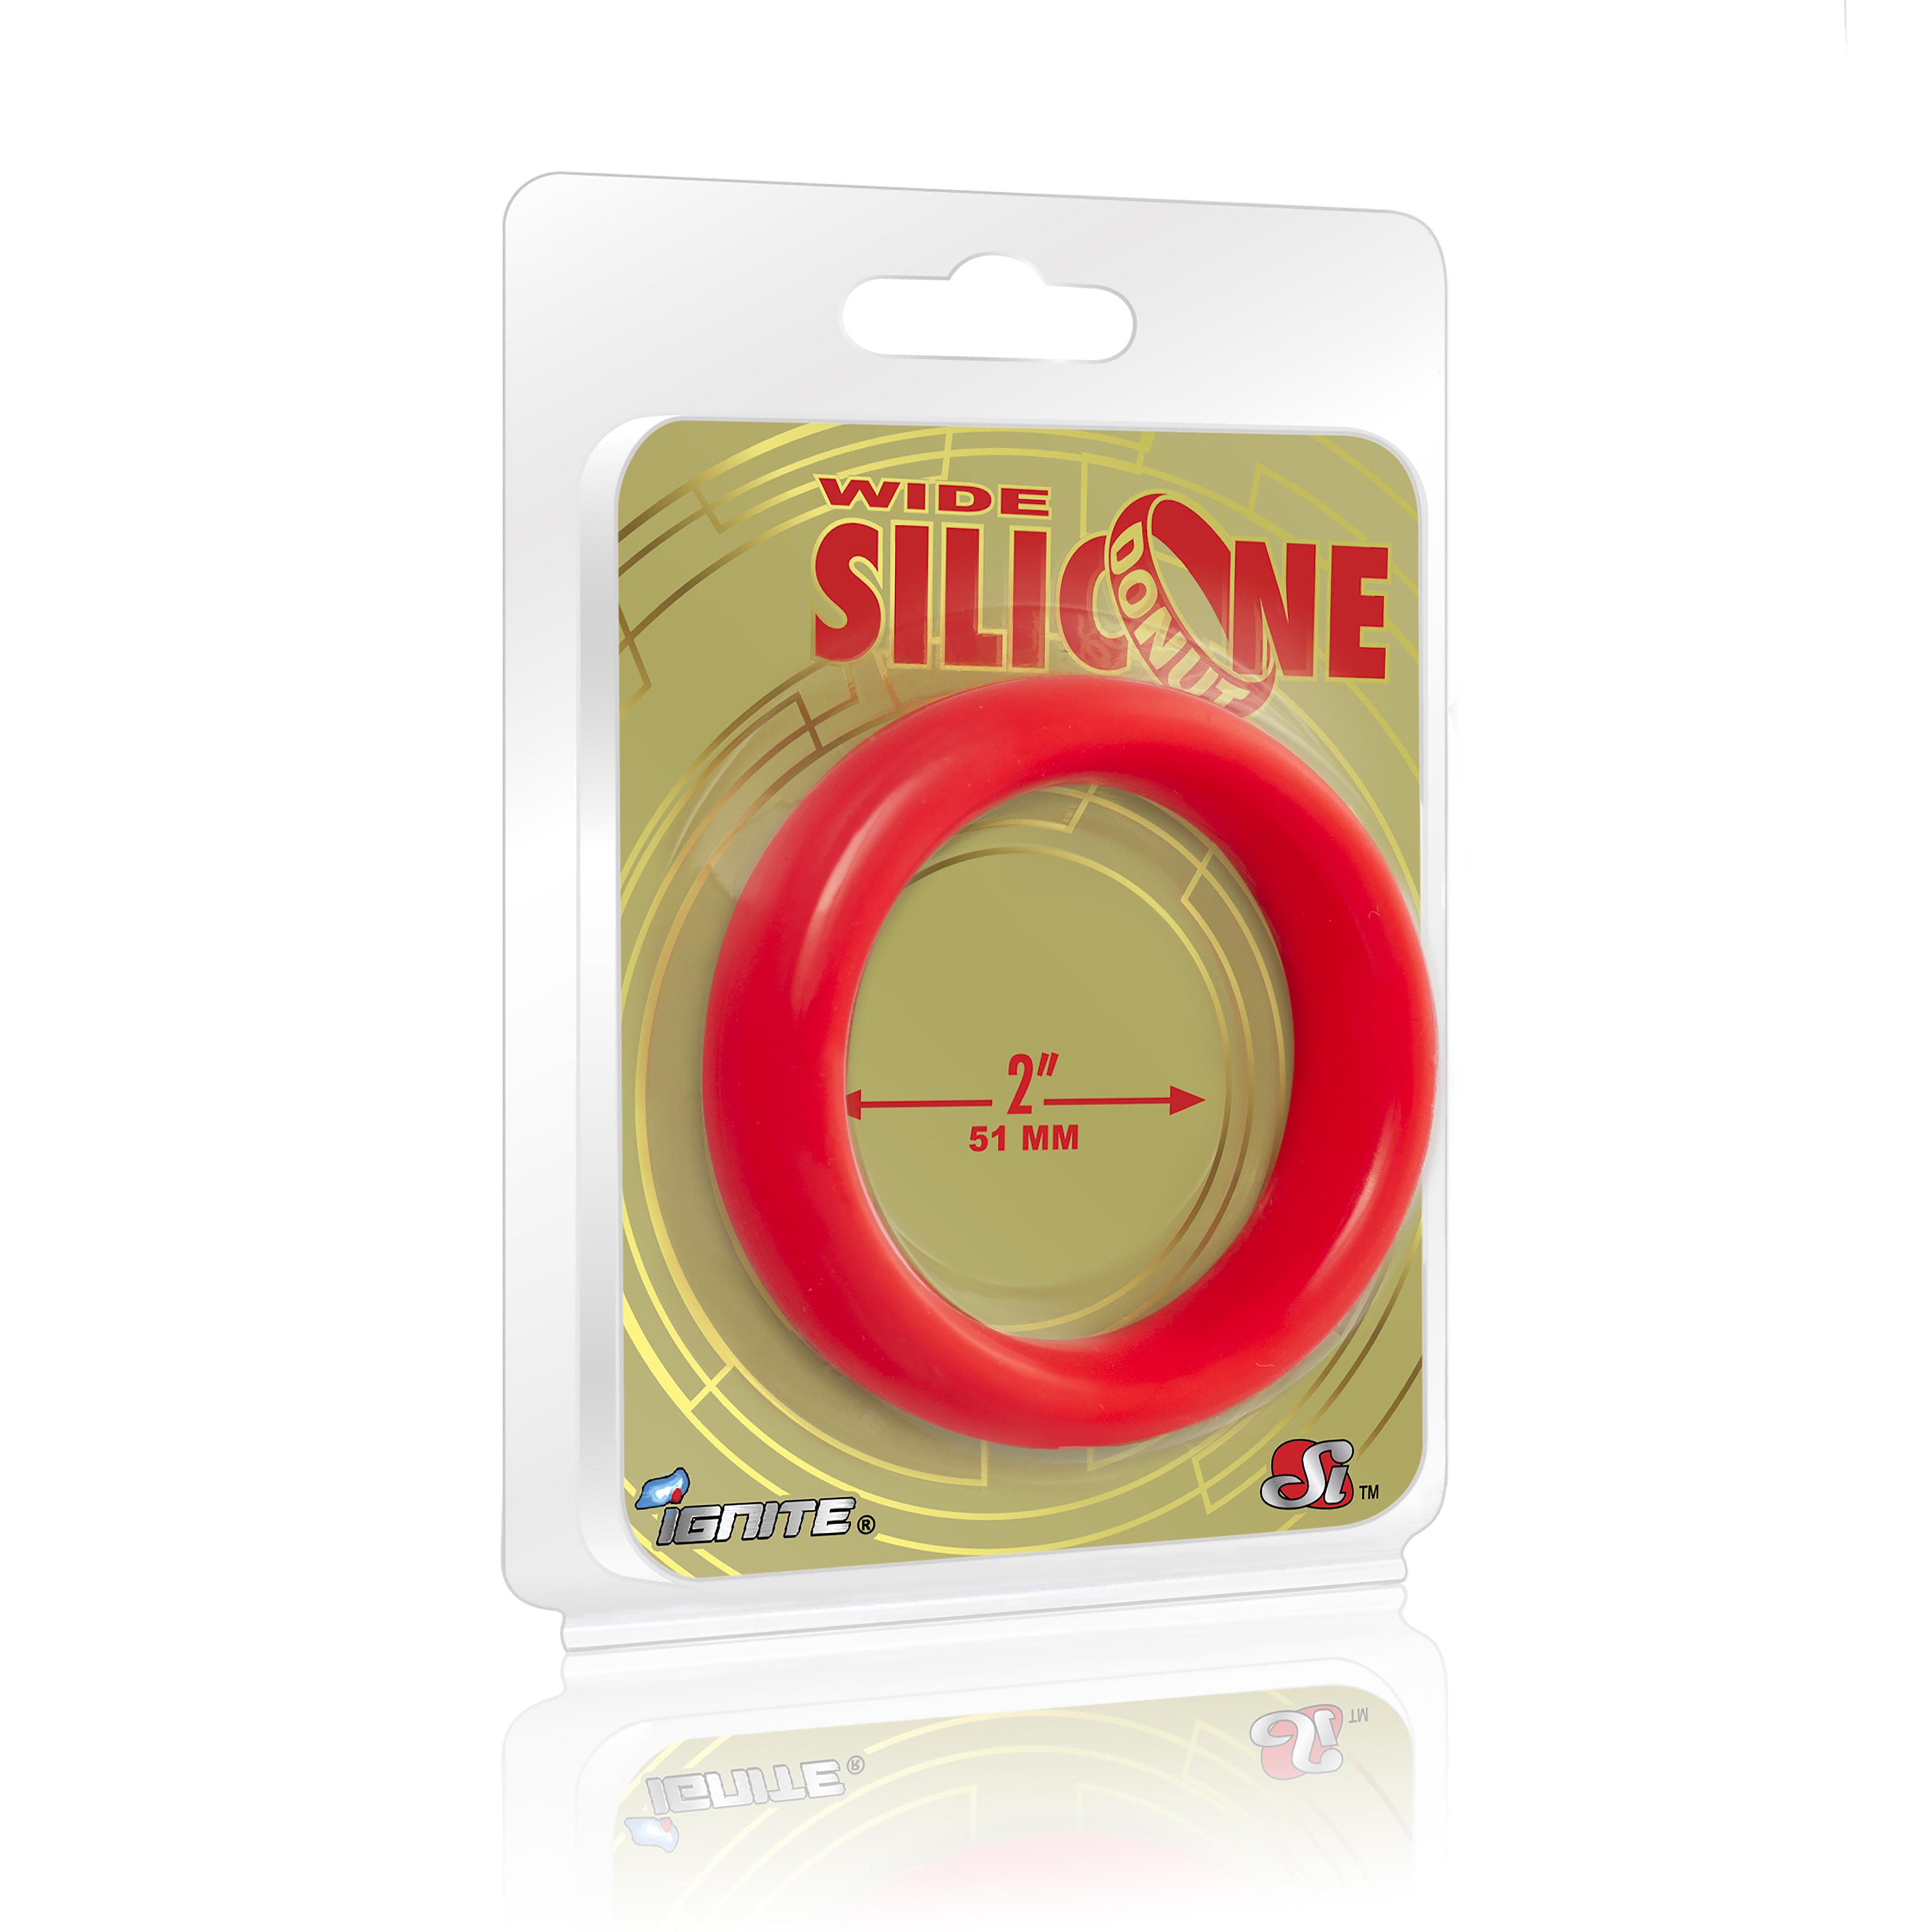 SI IGNITE Wide Silicone Donut Cockring, ¯ 51 mm, Red